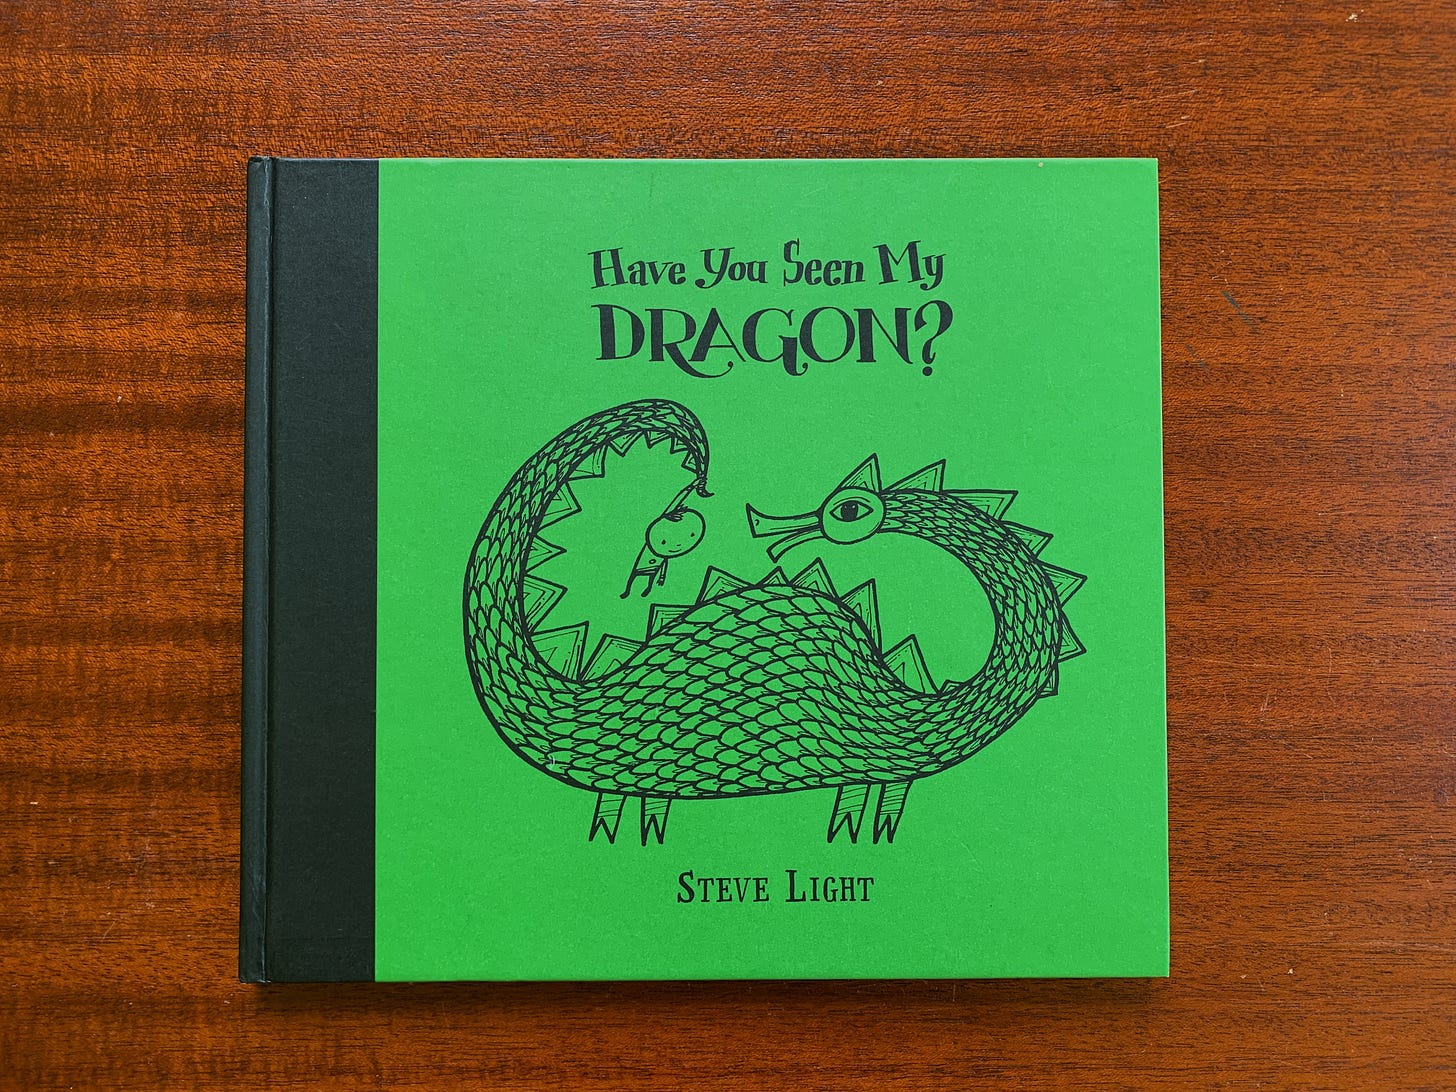 The front cover of "Have You Seen My Dragon?" by Steve Light. The cover is green and has an illustration of a dragon and a little boy holding its tail.